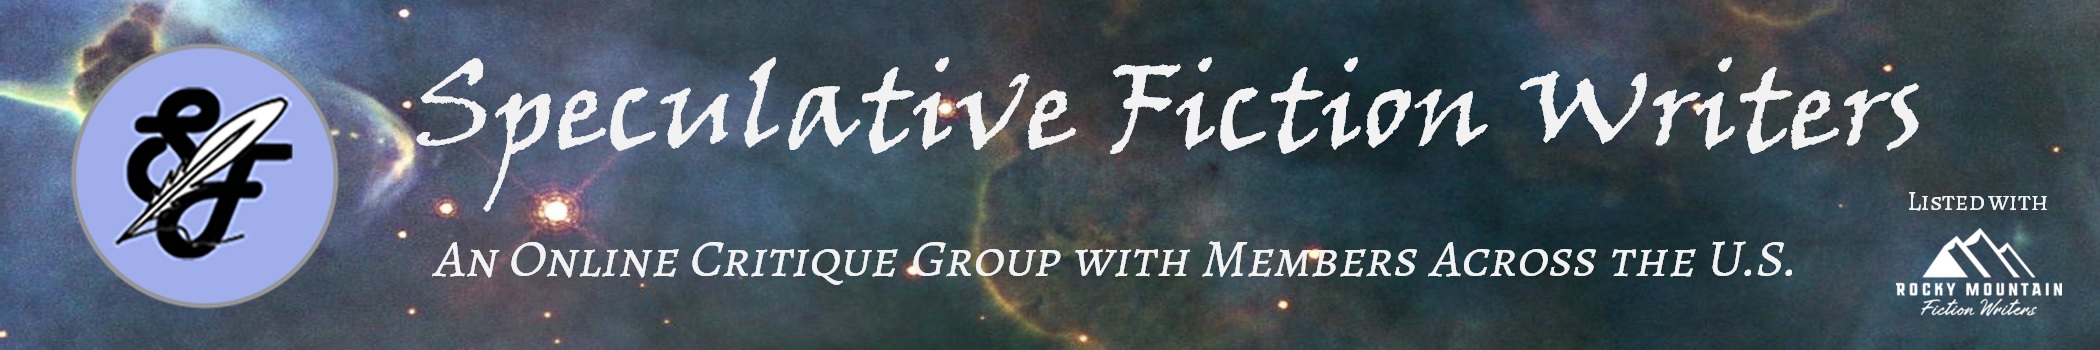 Speculative Fiction Writers